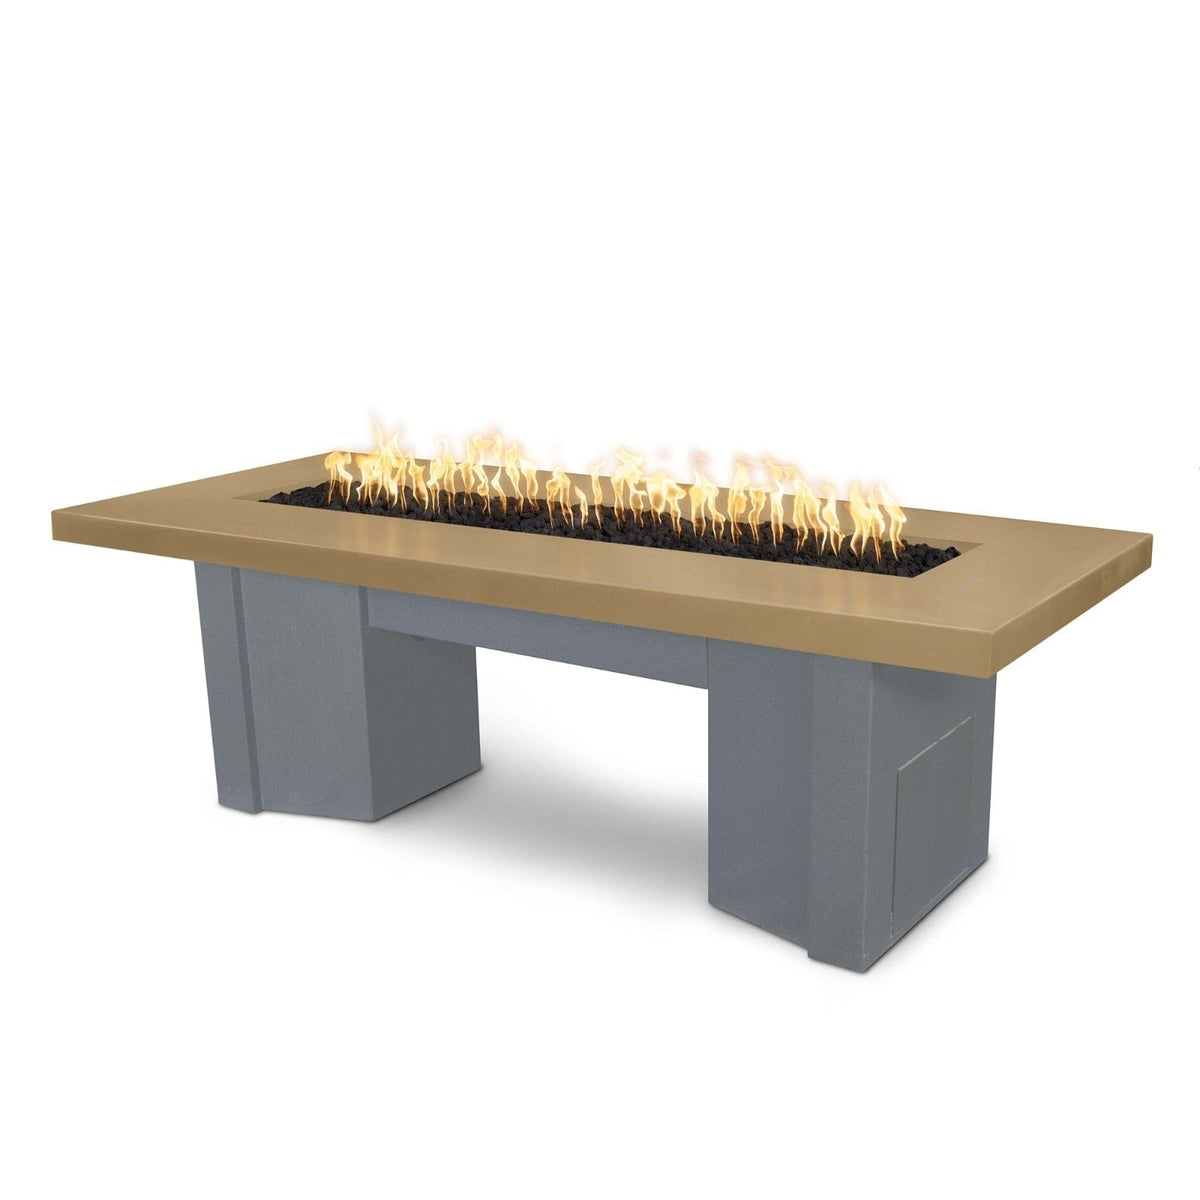 The Outdoor Plus Fire Features Brown (-BRN) / Gray Powder Coated Steel (-GRY) The Outdoor Plus 78&quot; Alameda Fire Table Smooth Concrete in Natural Gas - Flame Sense System with Push Button Spark Igniter / OPT-ALMGFRC78FSEN-NG